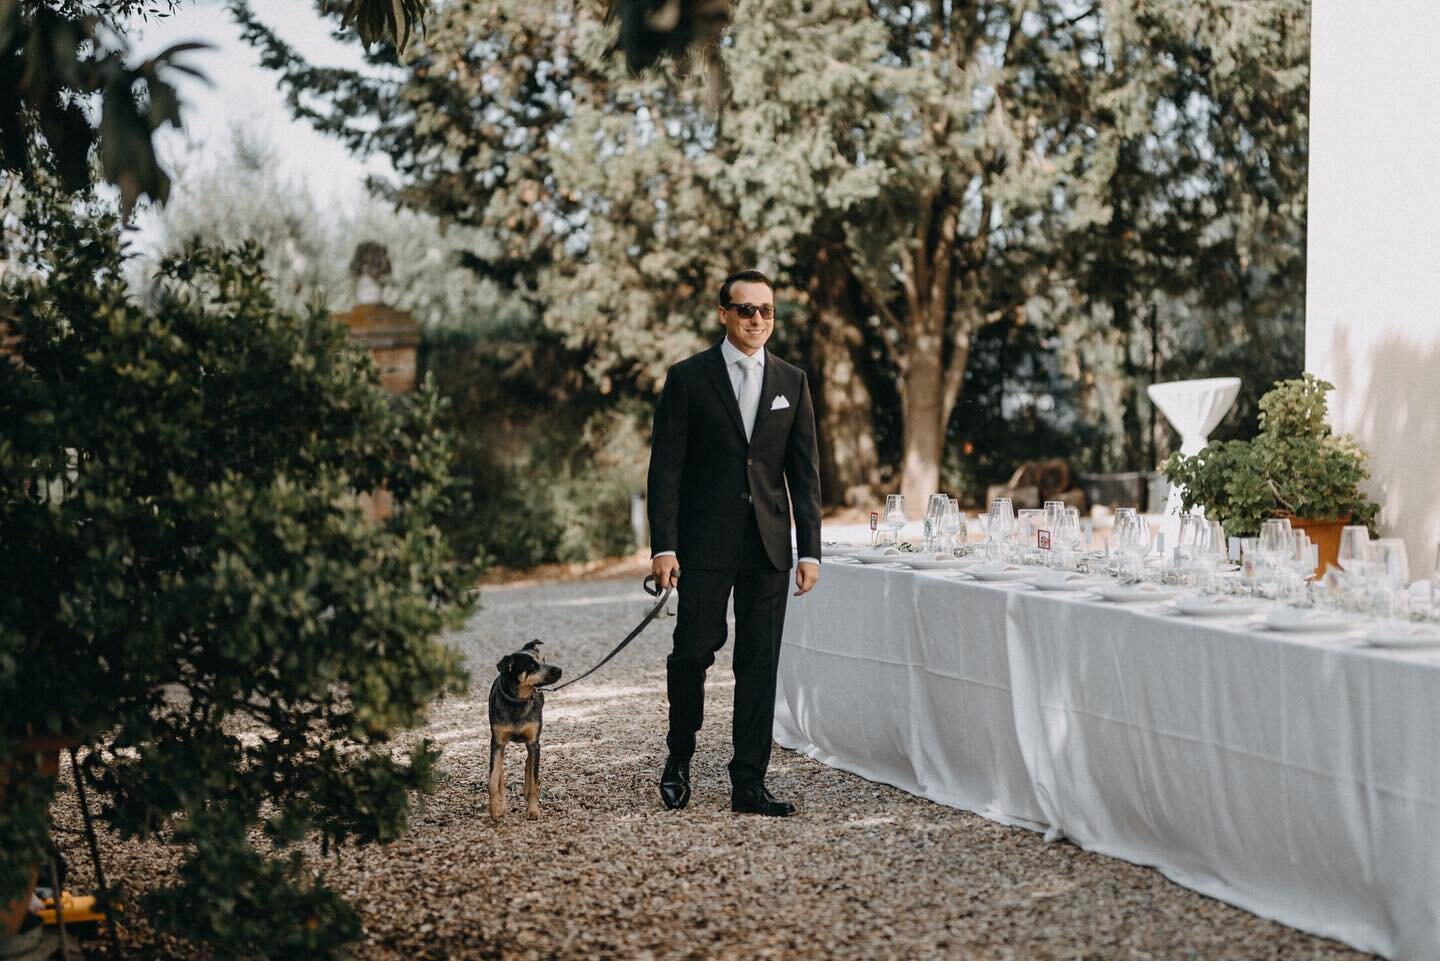 Weding tips! Don&rsquo;t forget to walk your dog before the ceremony! :))